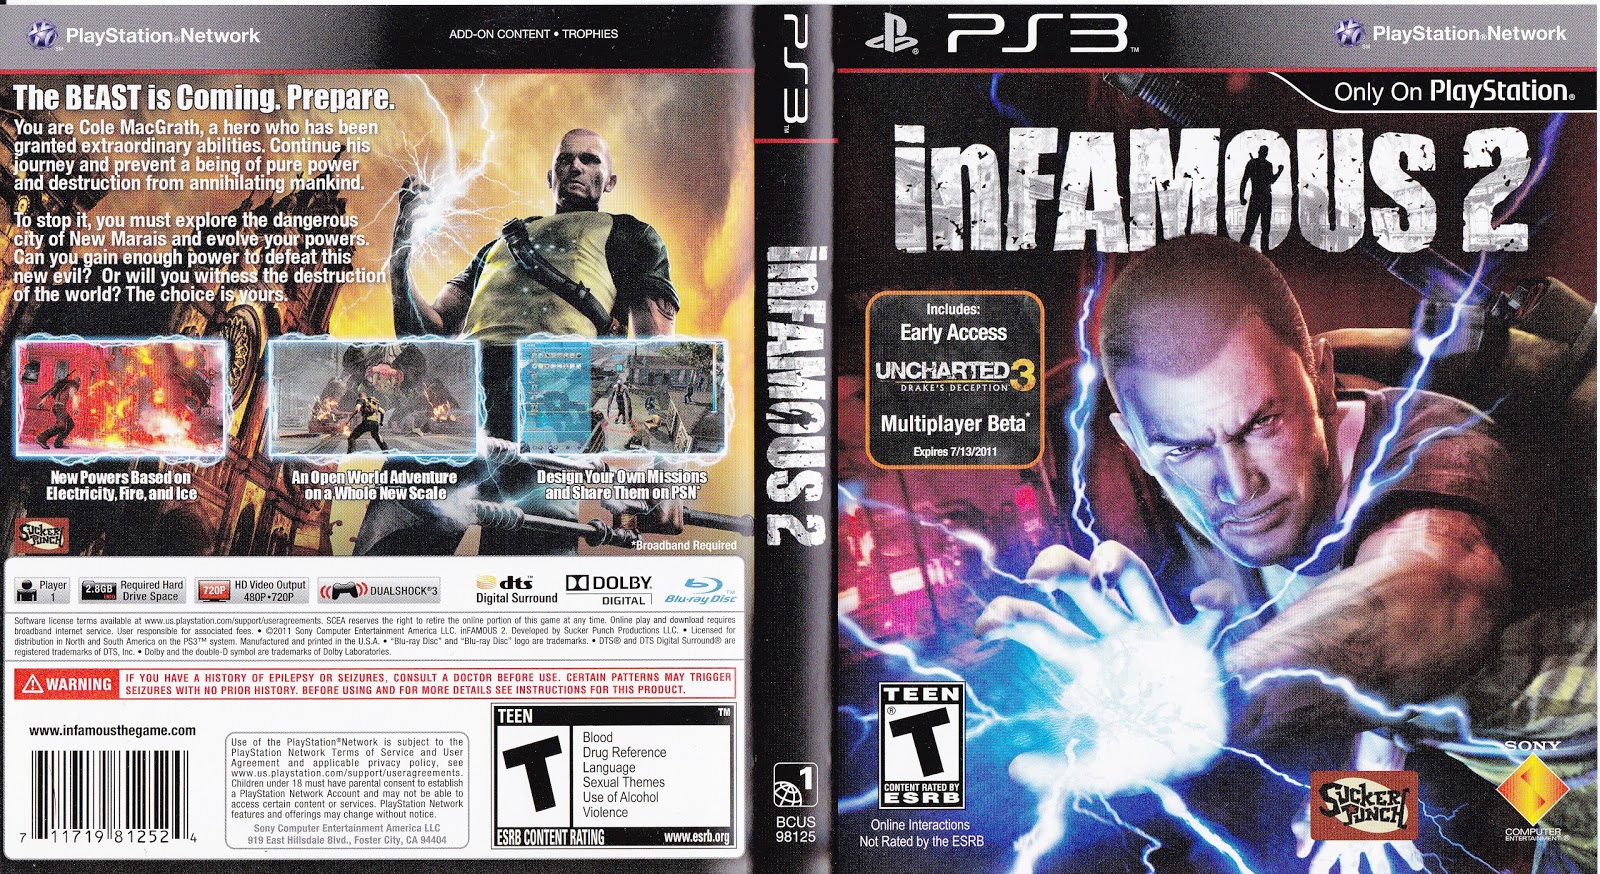 infamous ™ 2 download free